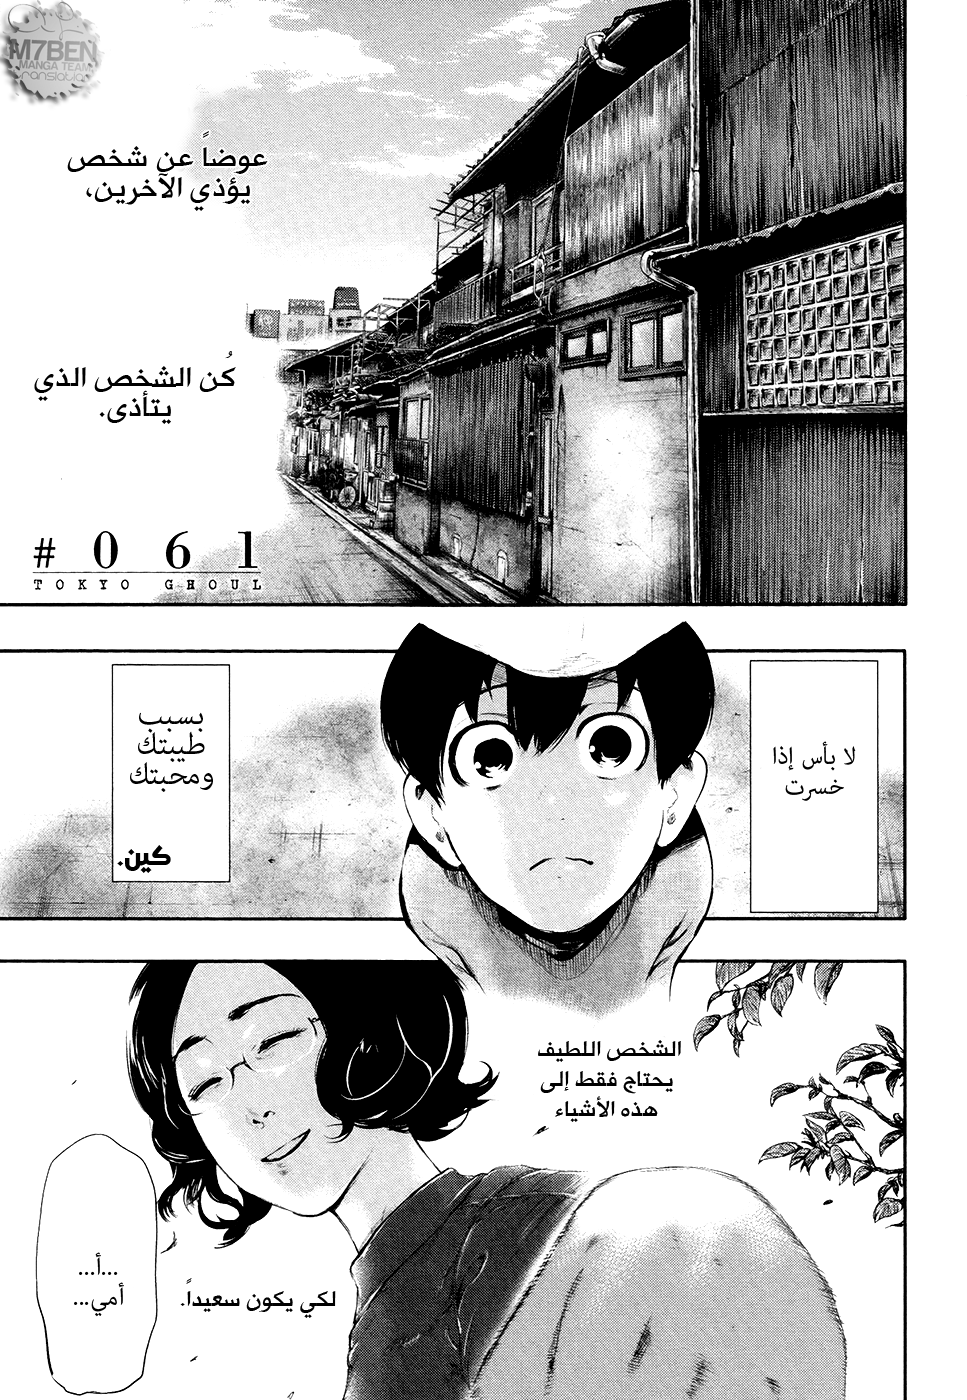 Tokyo Ghoul: Chapter 61 - Page 1